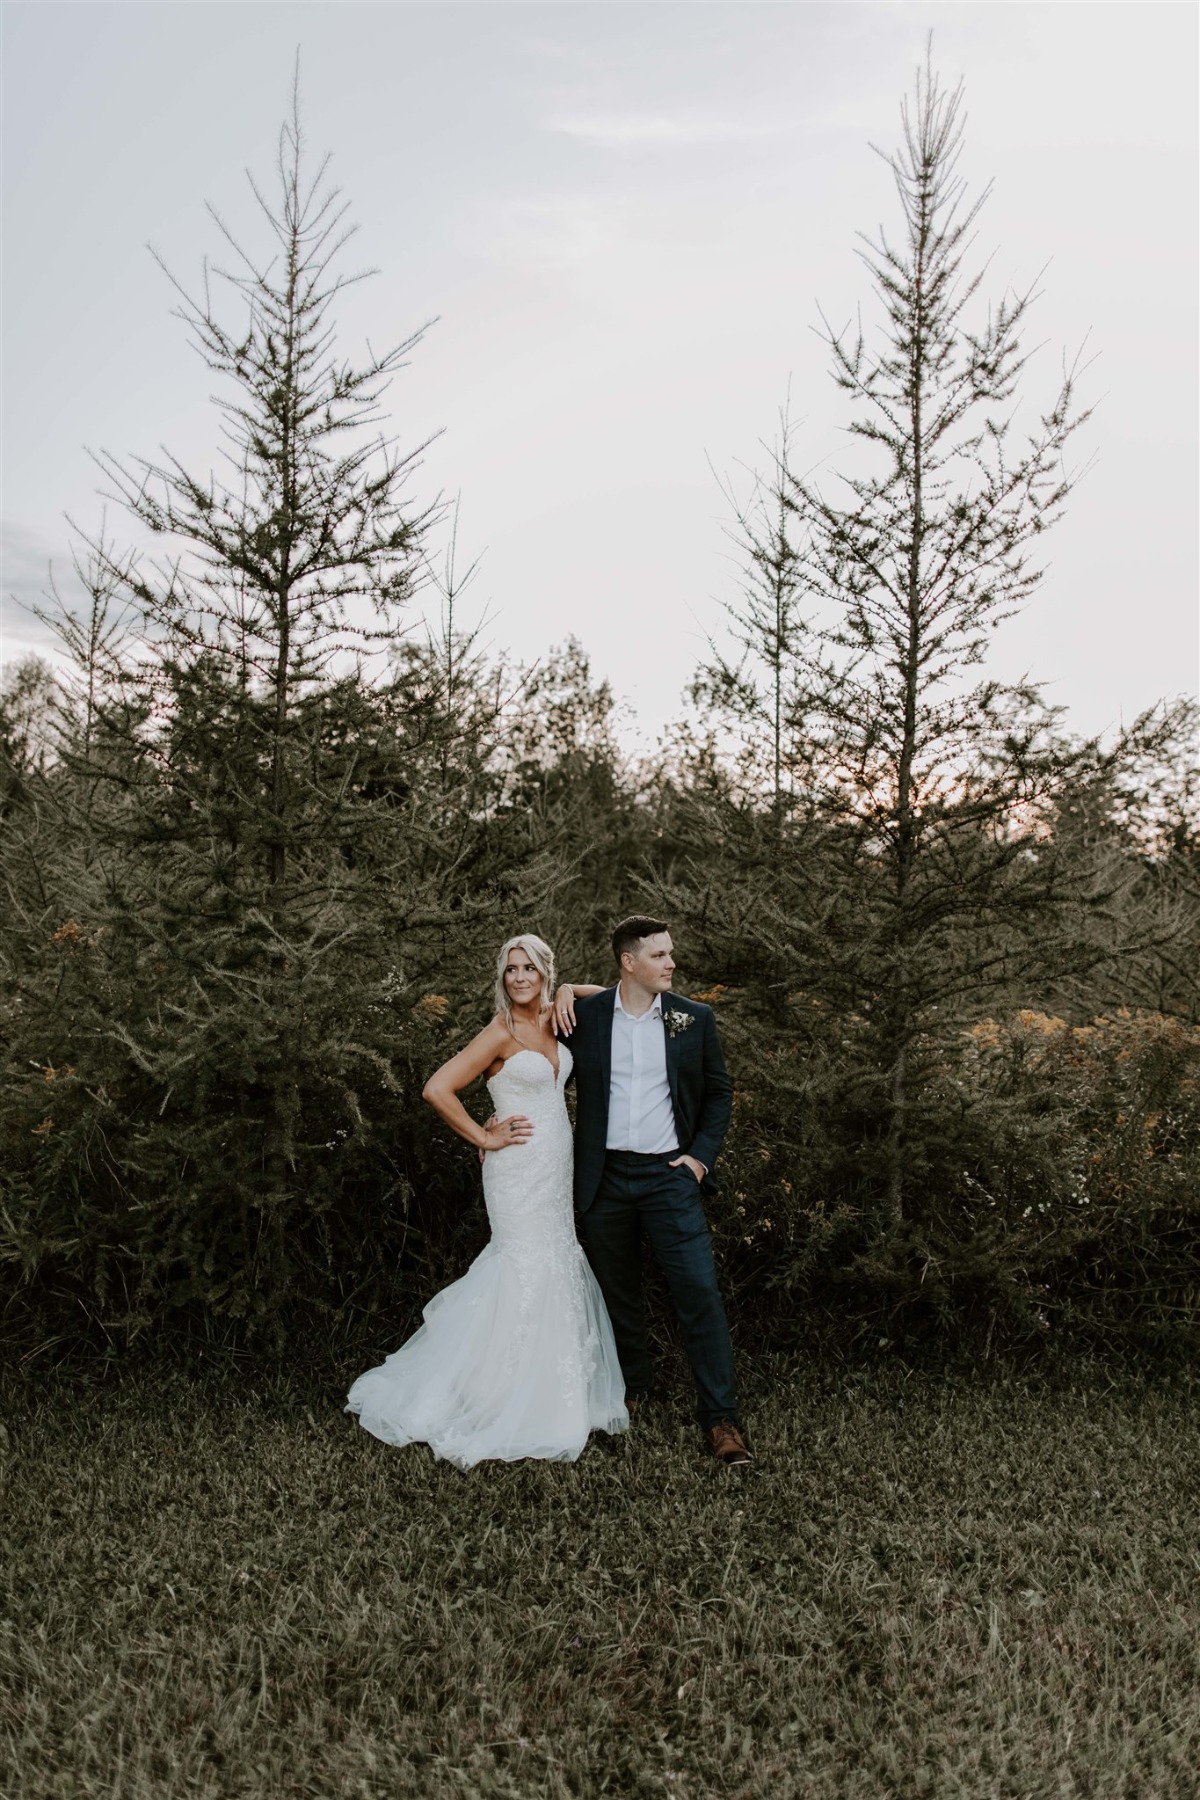 Lindsay and Mitch's Settlers Loft fun-filled wedding